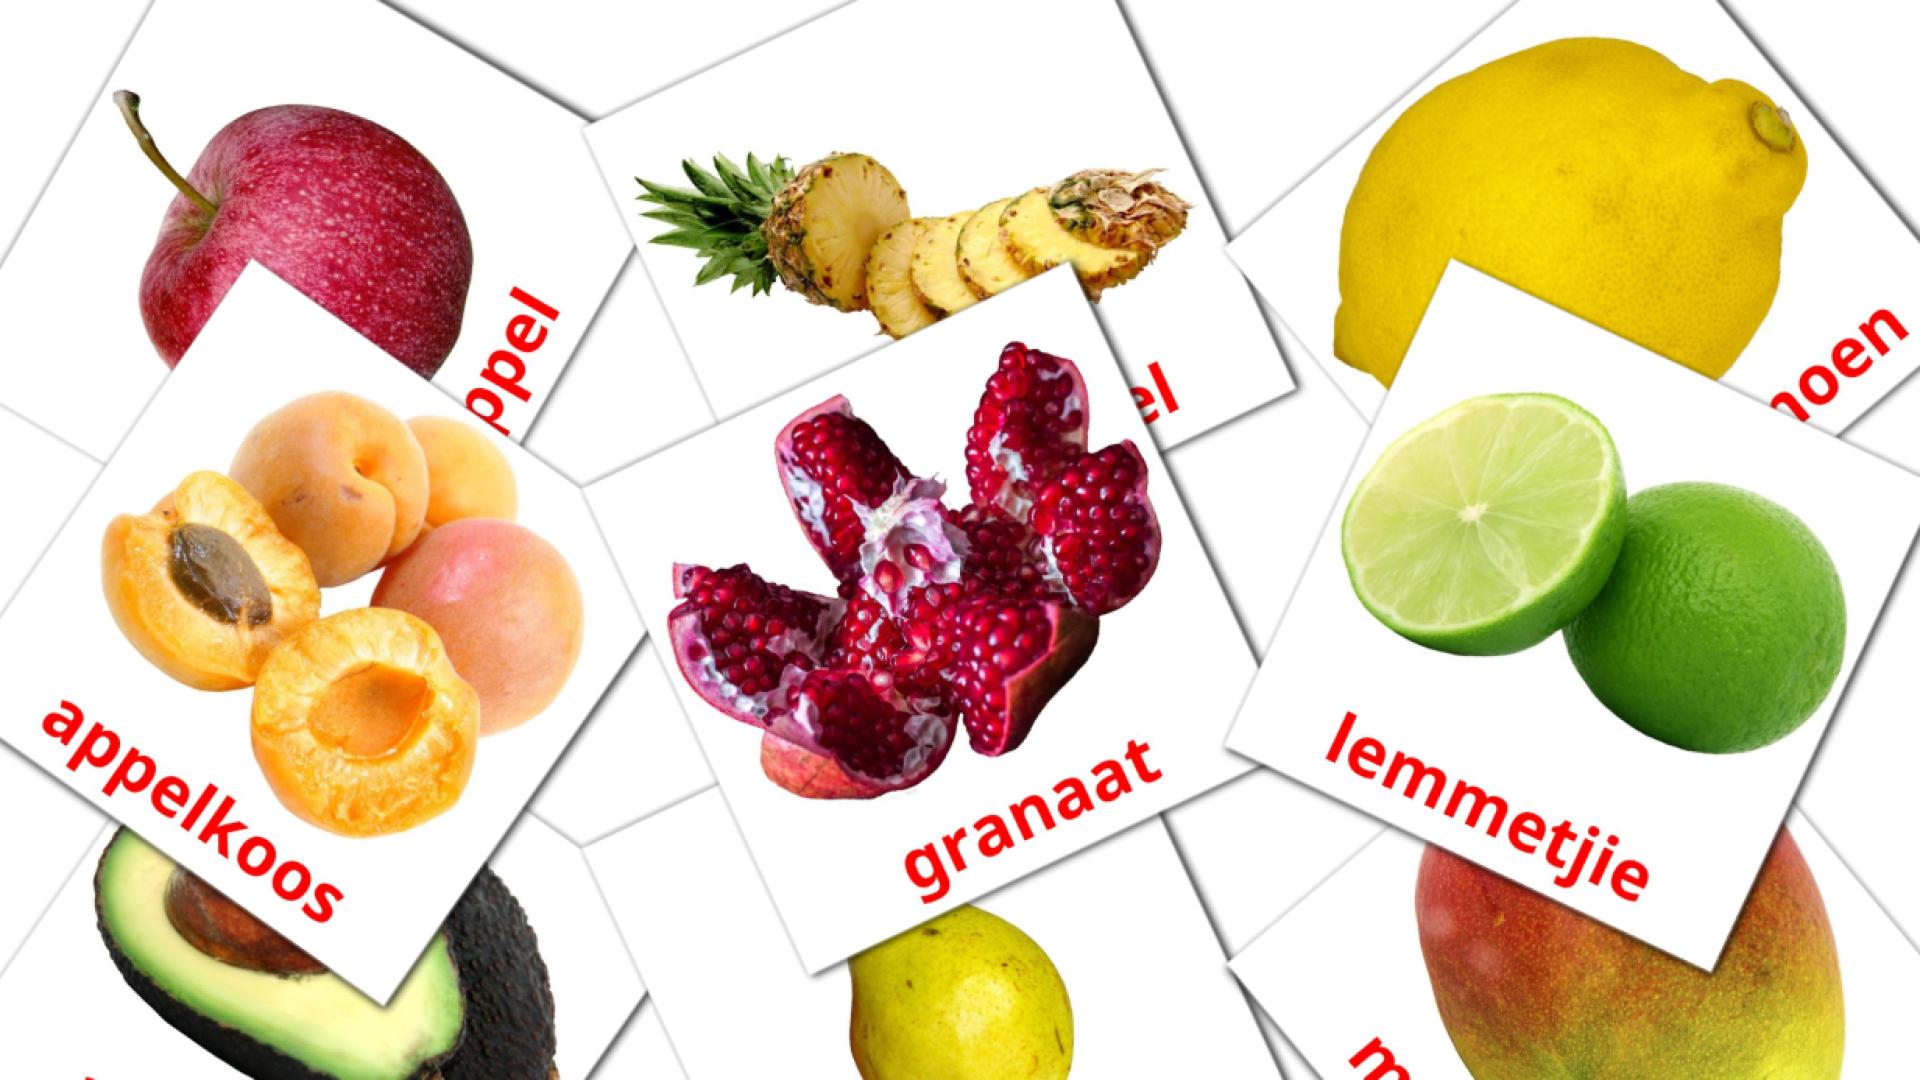 Fruits - afrikaans vocabulary cards